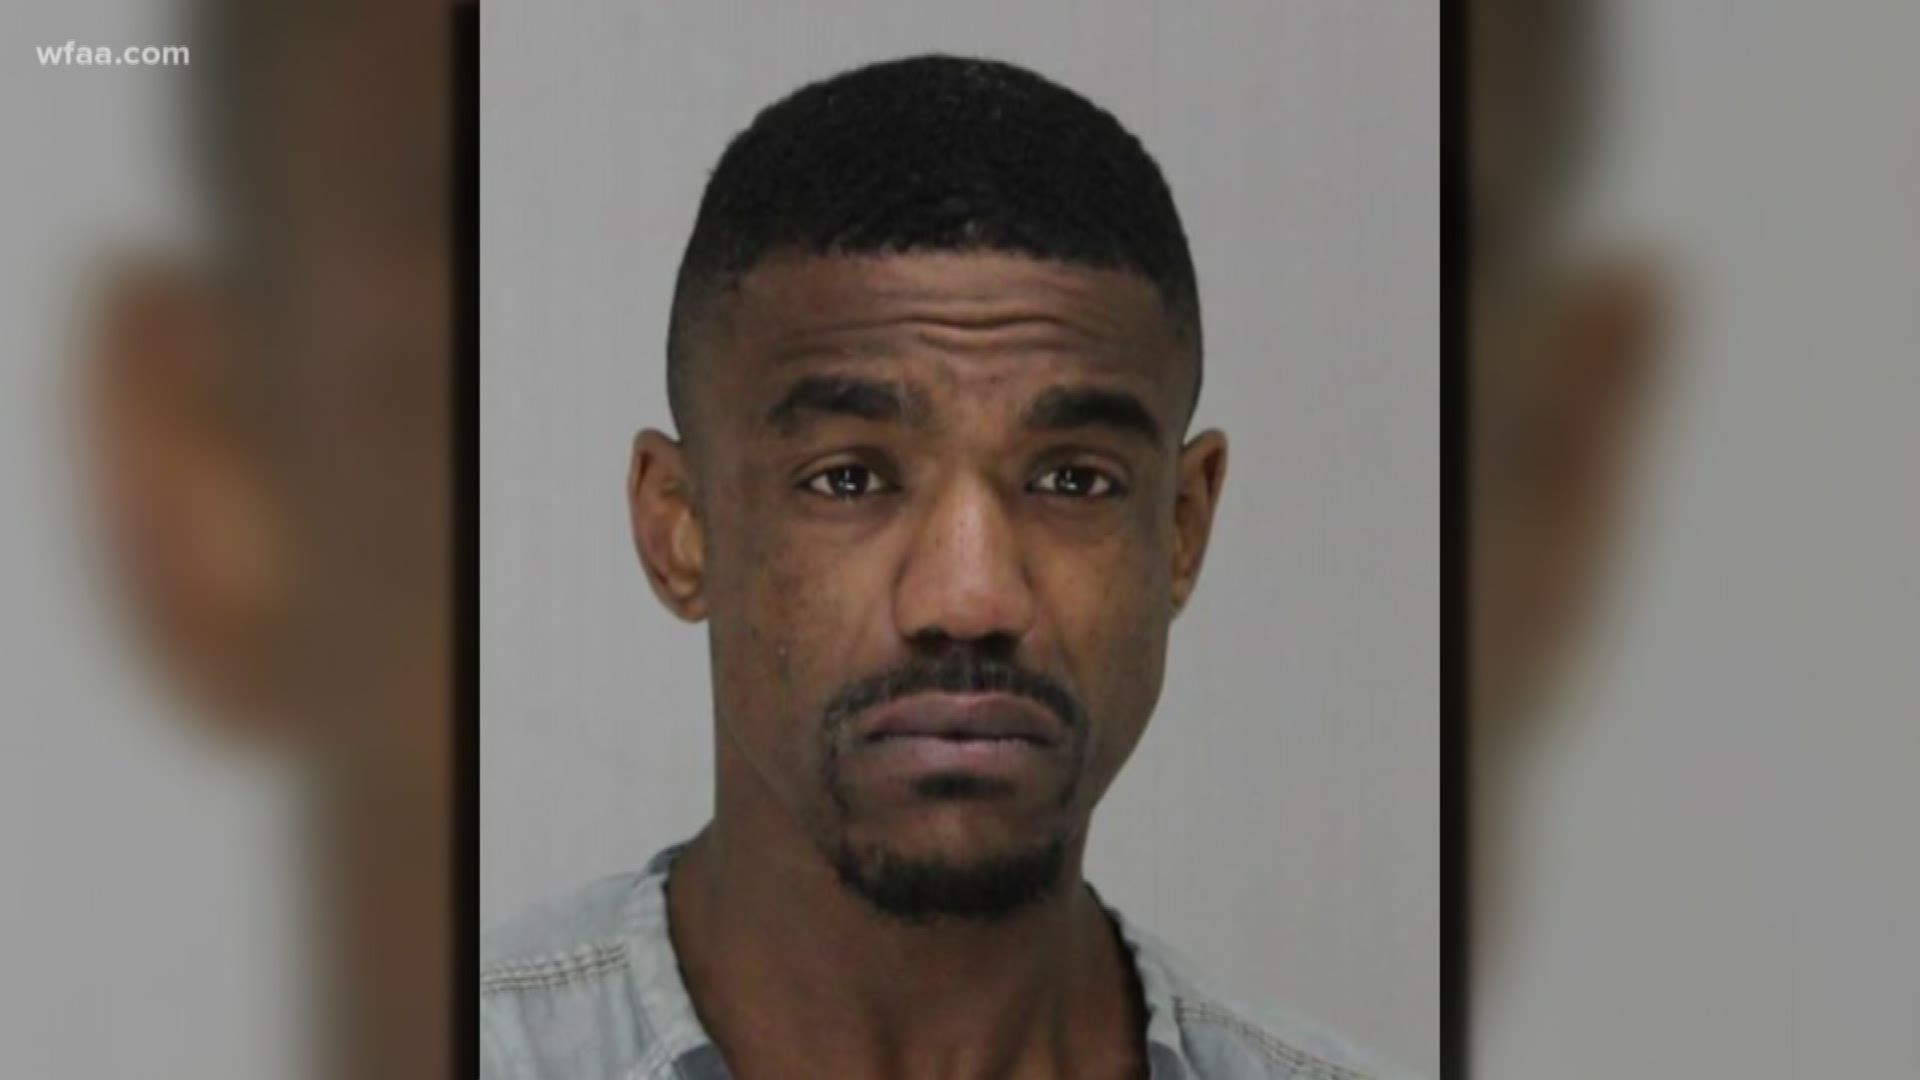 Police arrested Kemetrick Sykes on Monday after he approached an officer who was in uniform and was working off duty at a Walmart in North Dallas. Investigators say Sykes approached the officer and allegedly threatened to kill him.